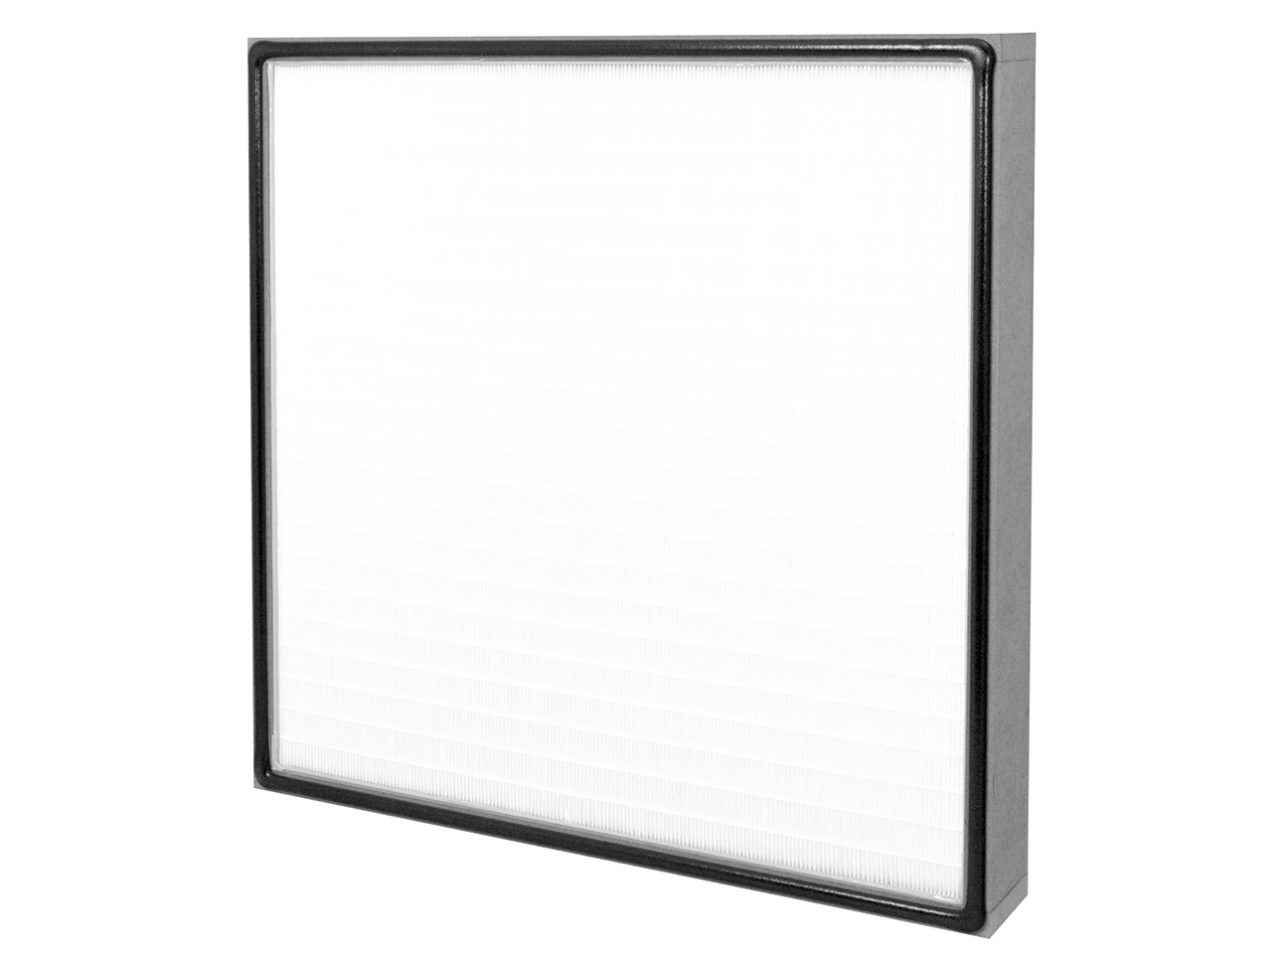 High Efficiency Air Filters for cleanrooms